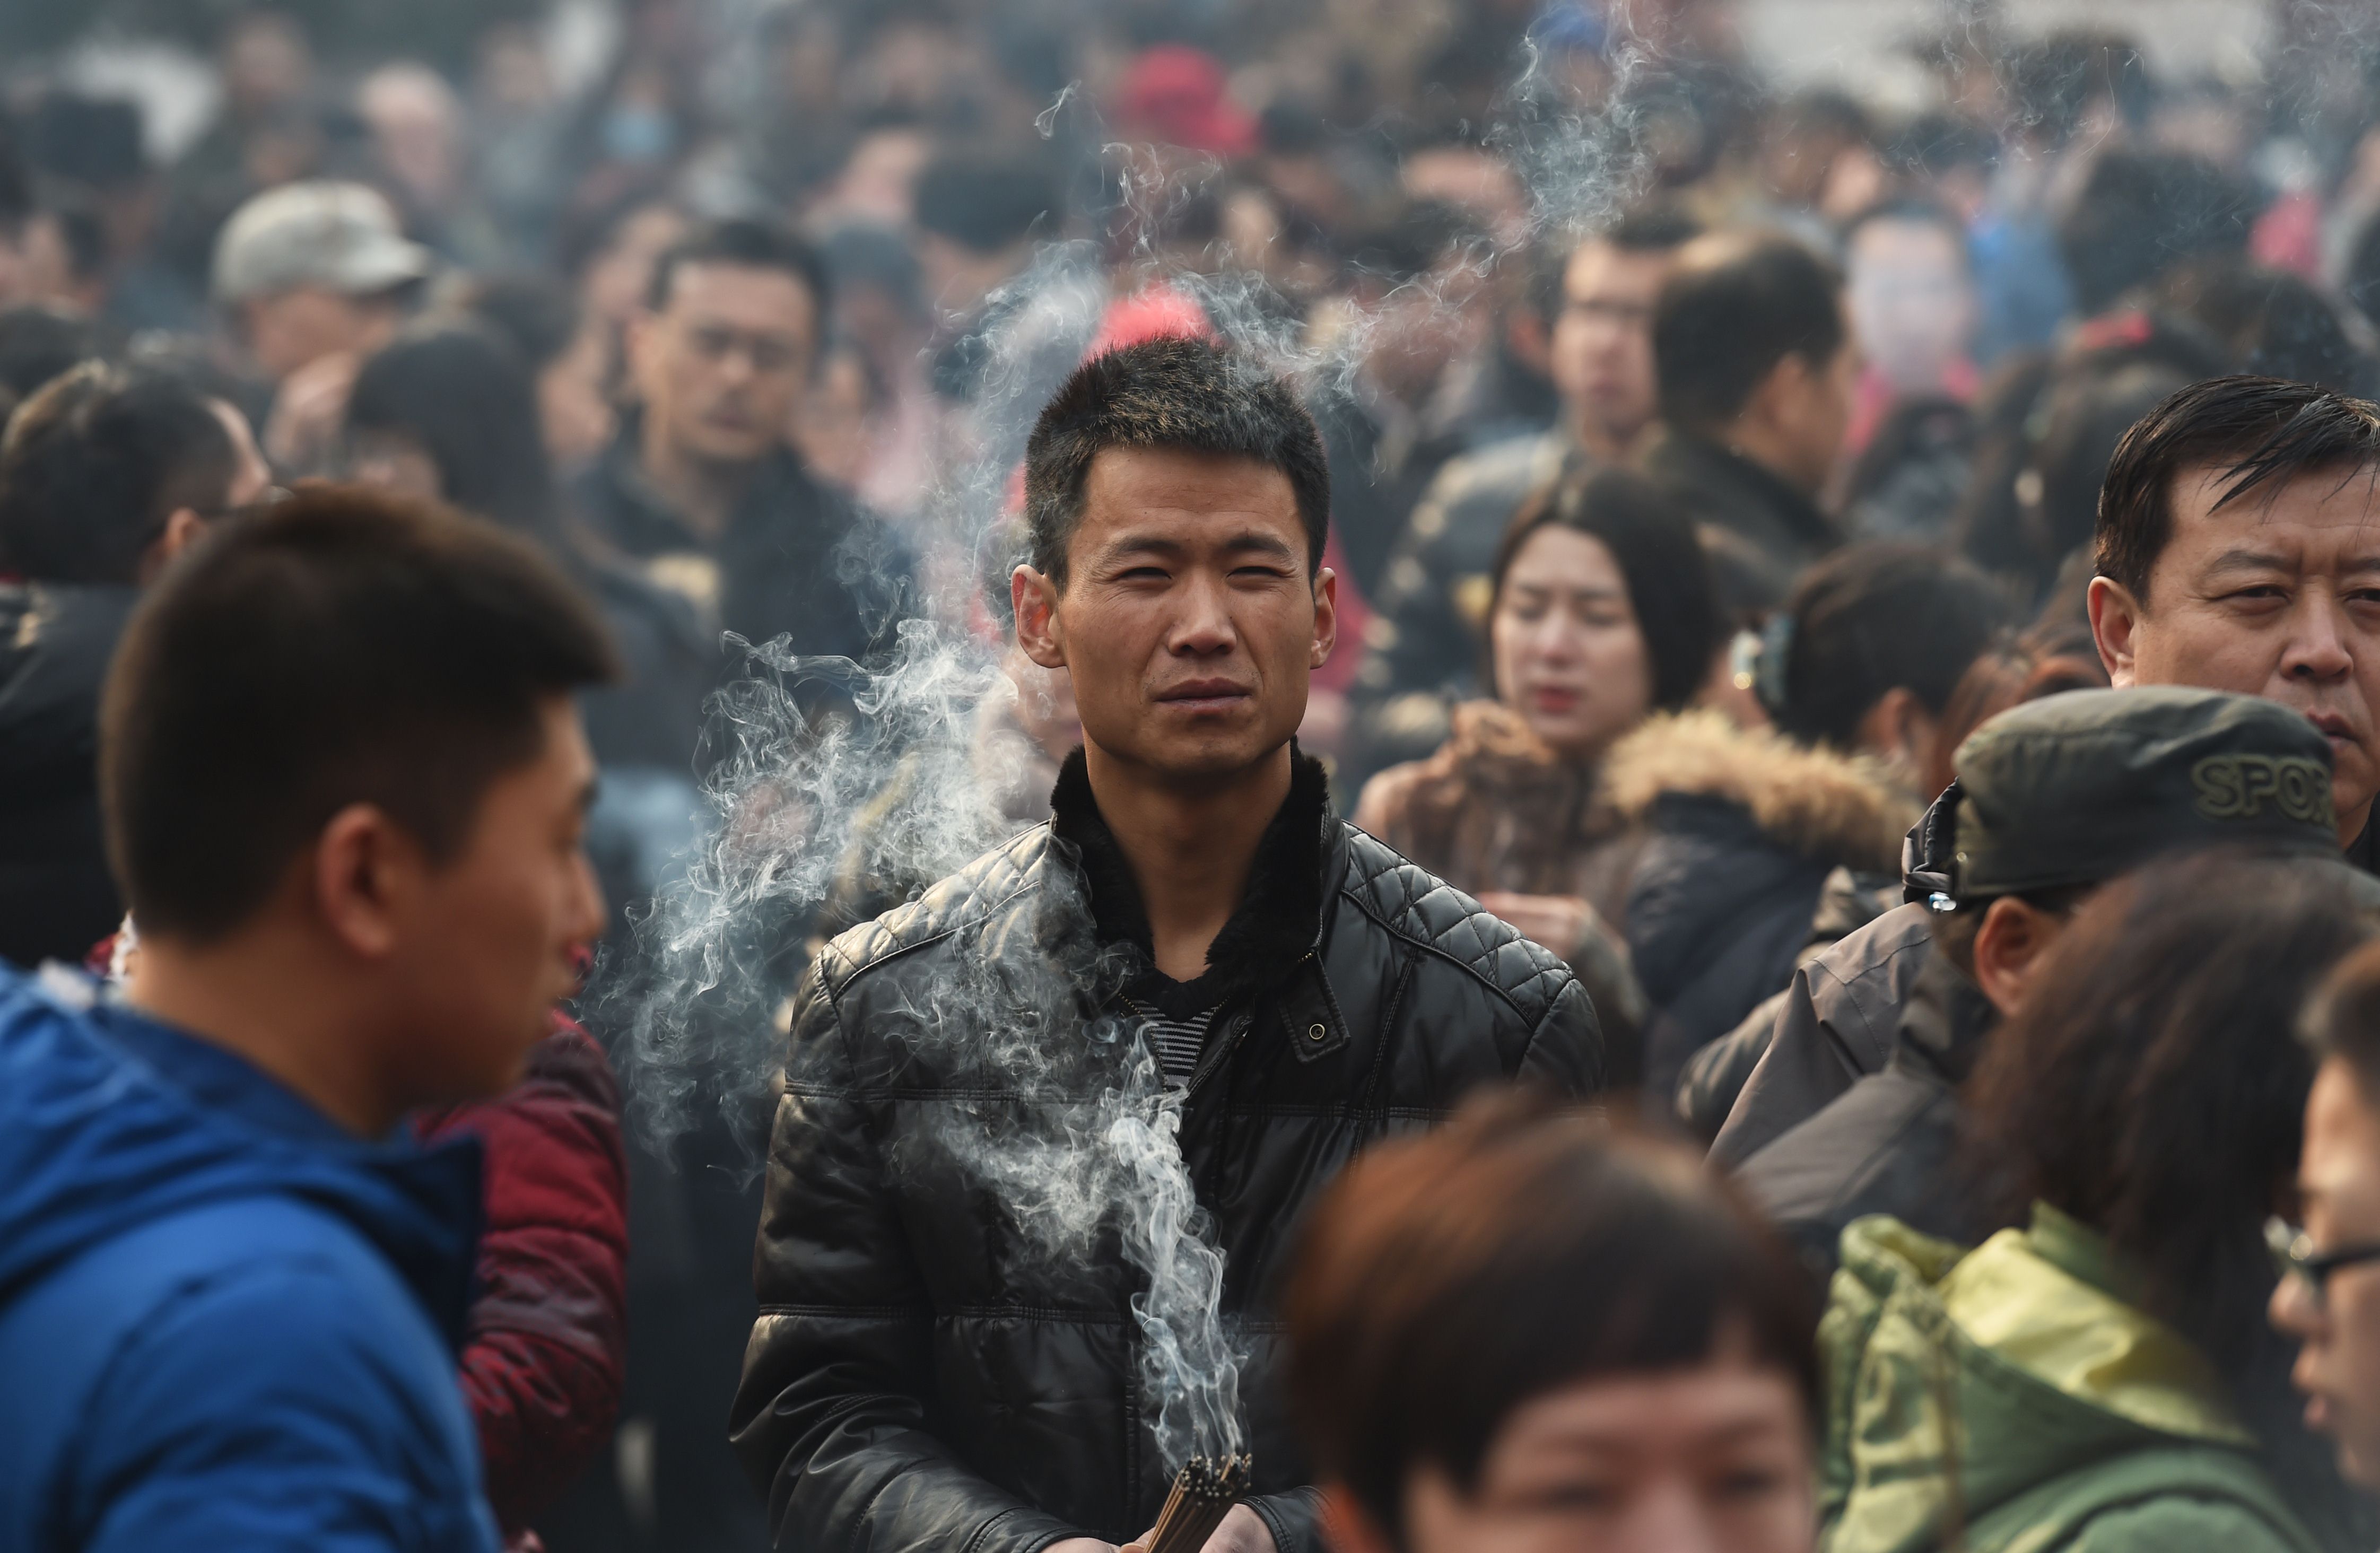 Worshippers pray in Beijing on the first day of the Lunar New Year. The vast majority of Chinese people do not benefit from cutting ties with their own society. Photo: AFP